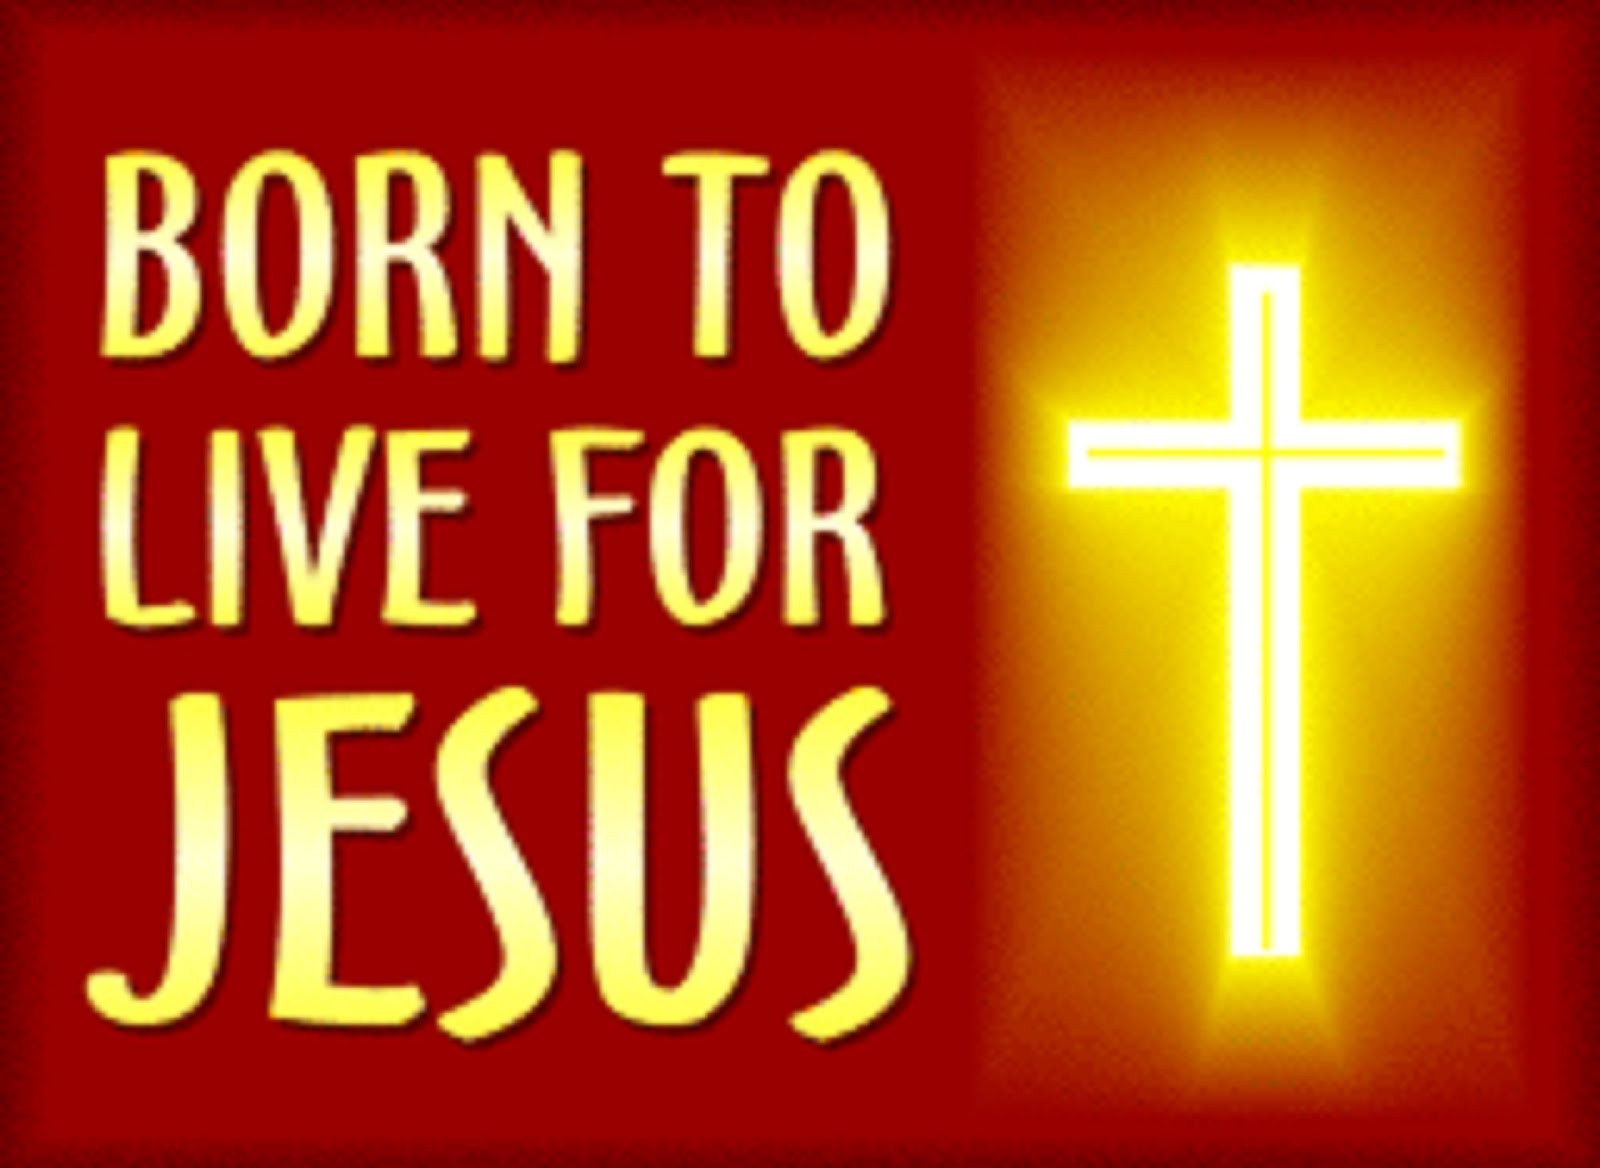 BORN TO LIVE FOR JESUS